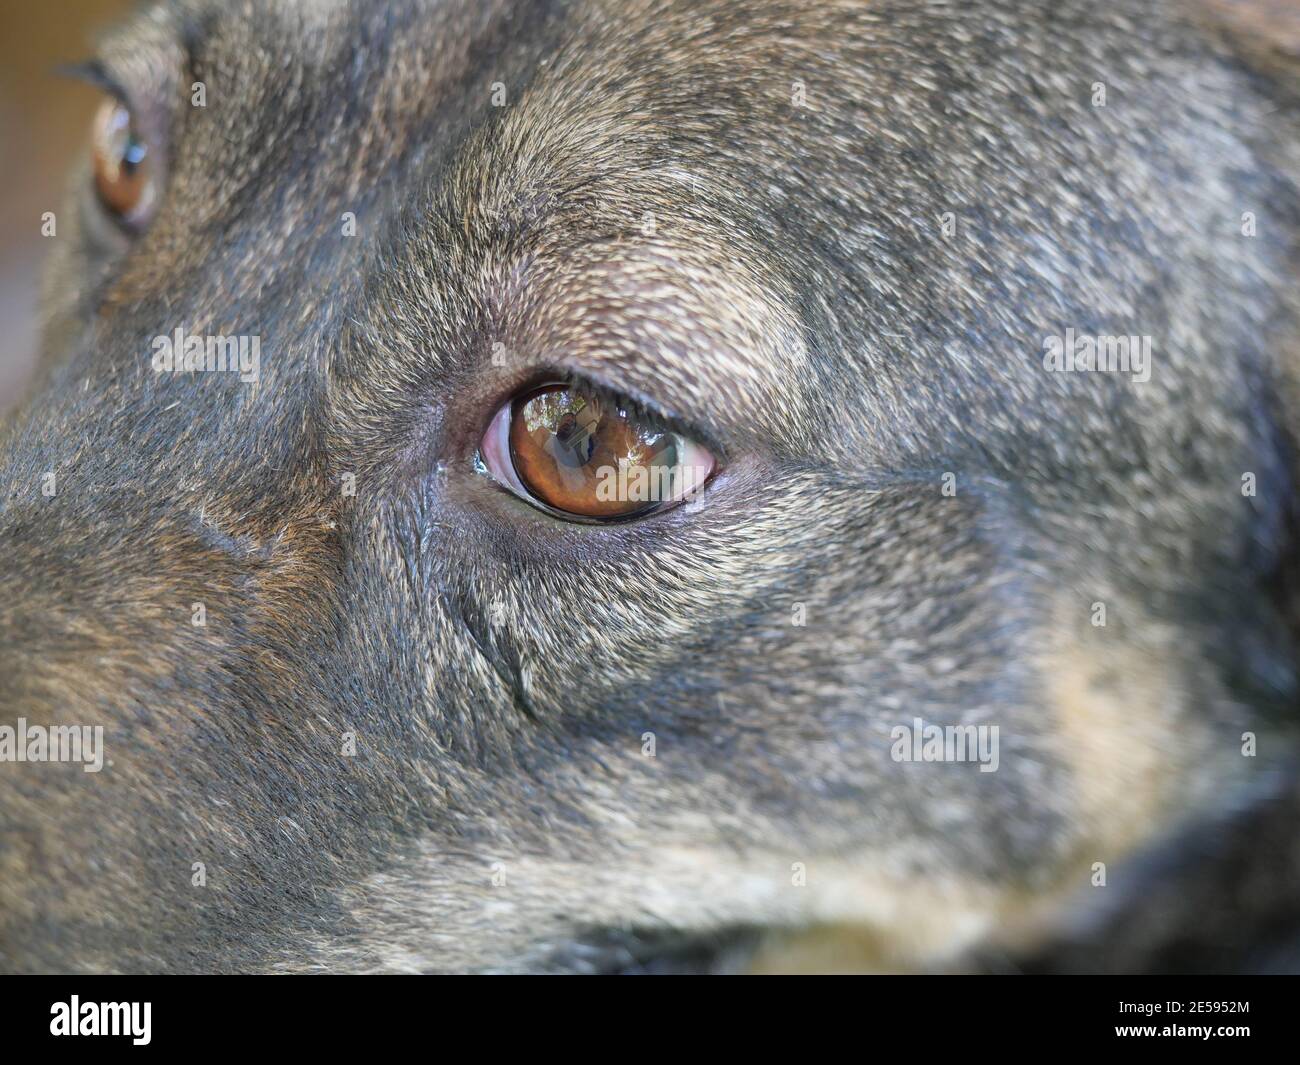 Inflamed and swollen eyes of short haired dog, Illness of pets that need care, Close up of the brown and black eye of the animal Stock Photo